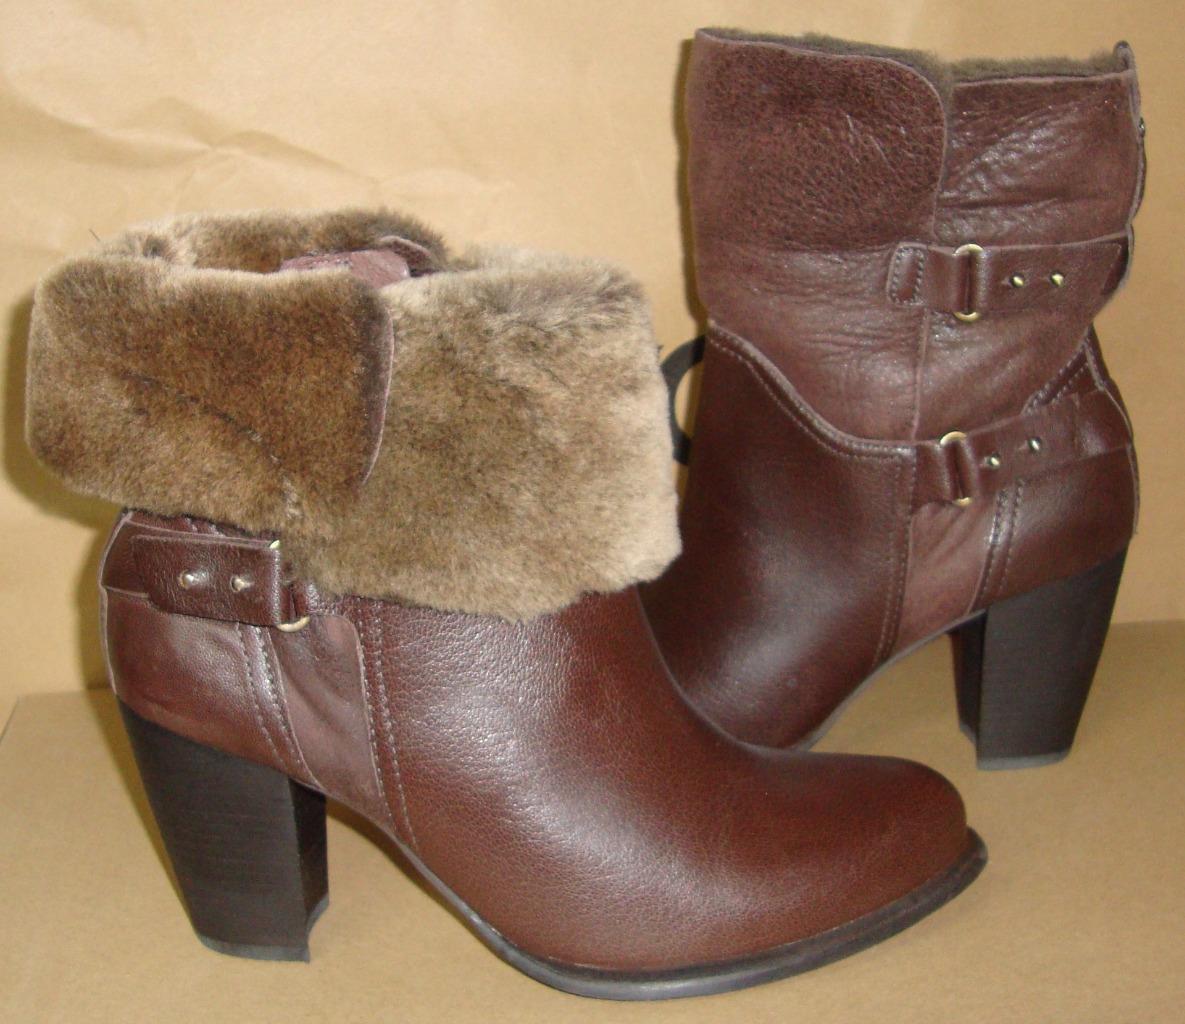 Primary image for UGG JAYNE Stout Leather Sheepskin Cuff Buckle Ankle Boots Size US 9 NIB #1013803